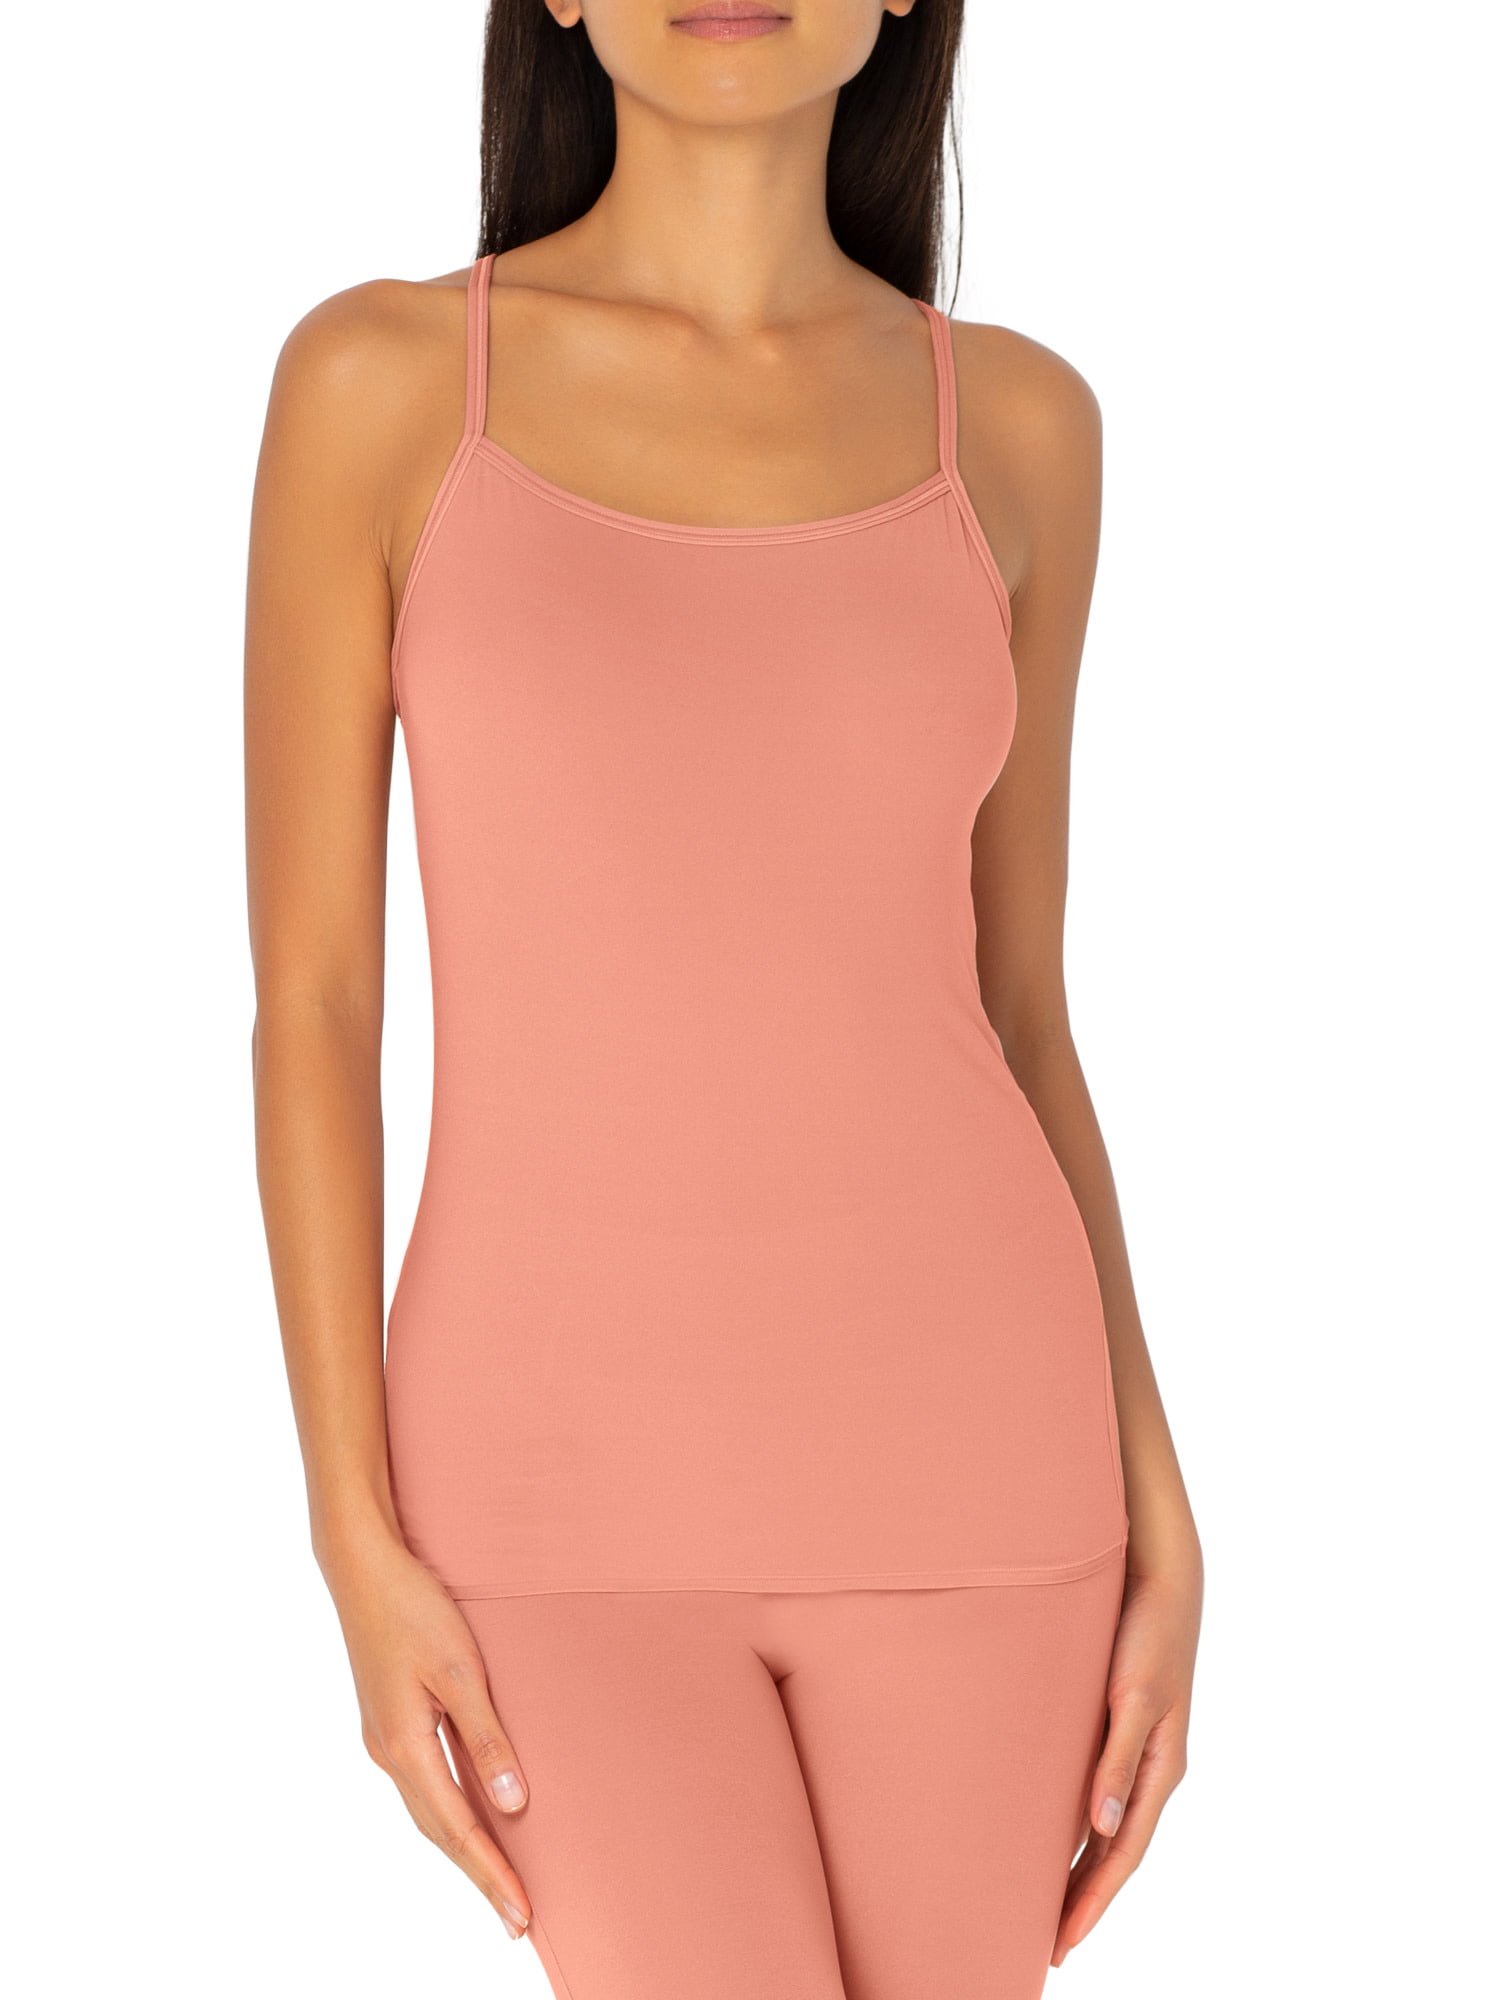 Smart & Sexy Women's Naked Stretch Cami Tank Top Style-SA1433